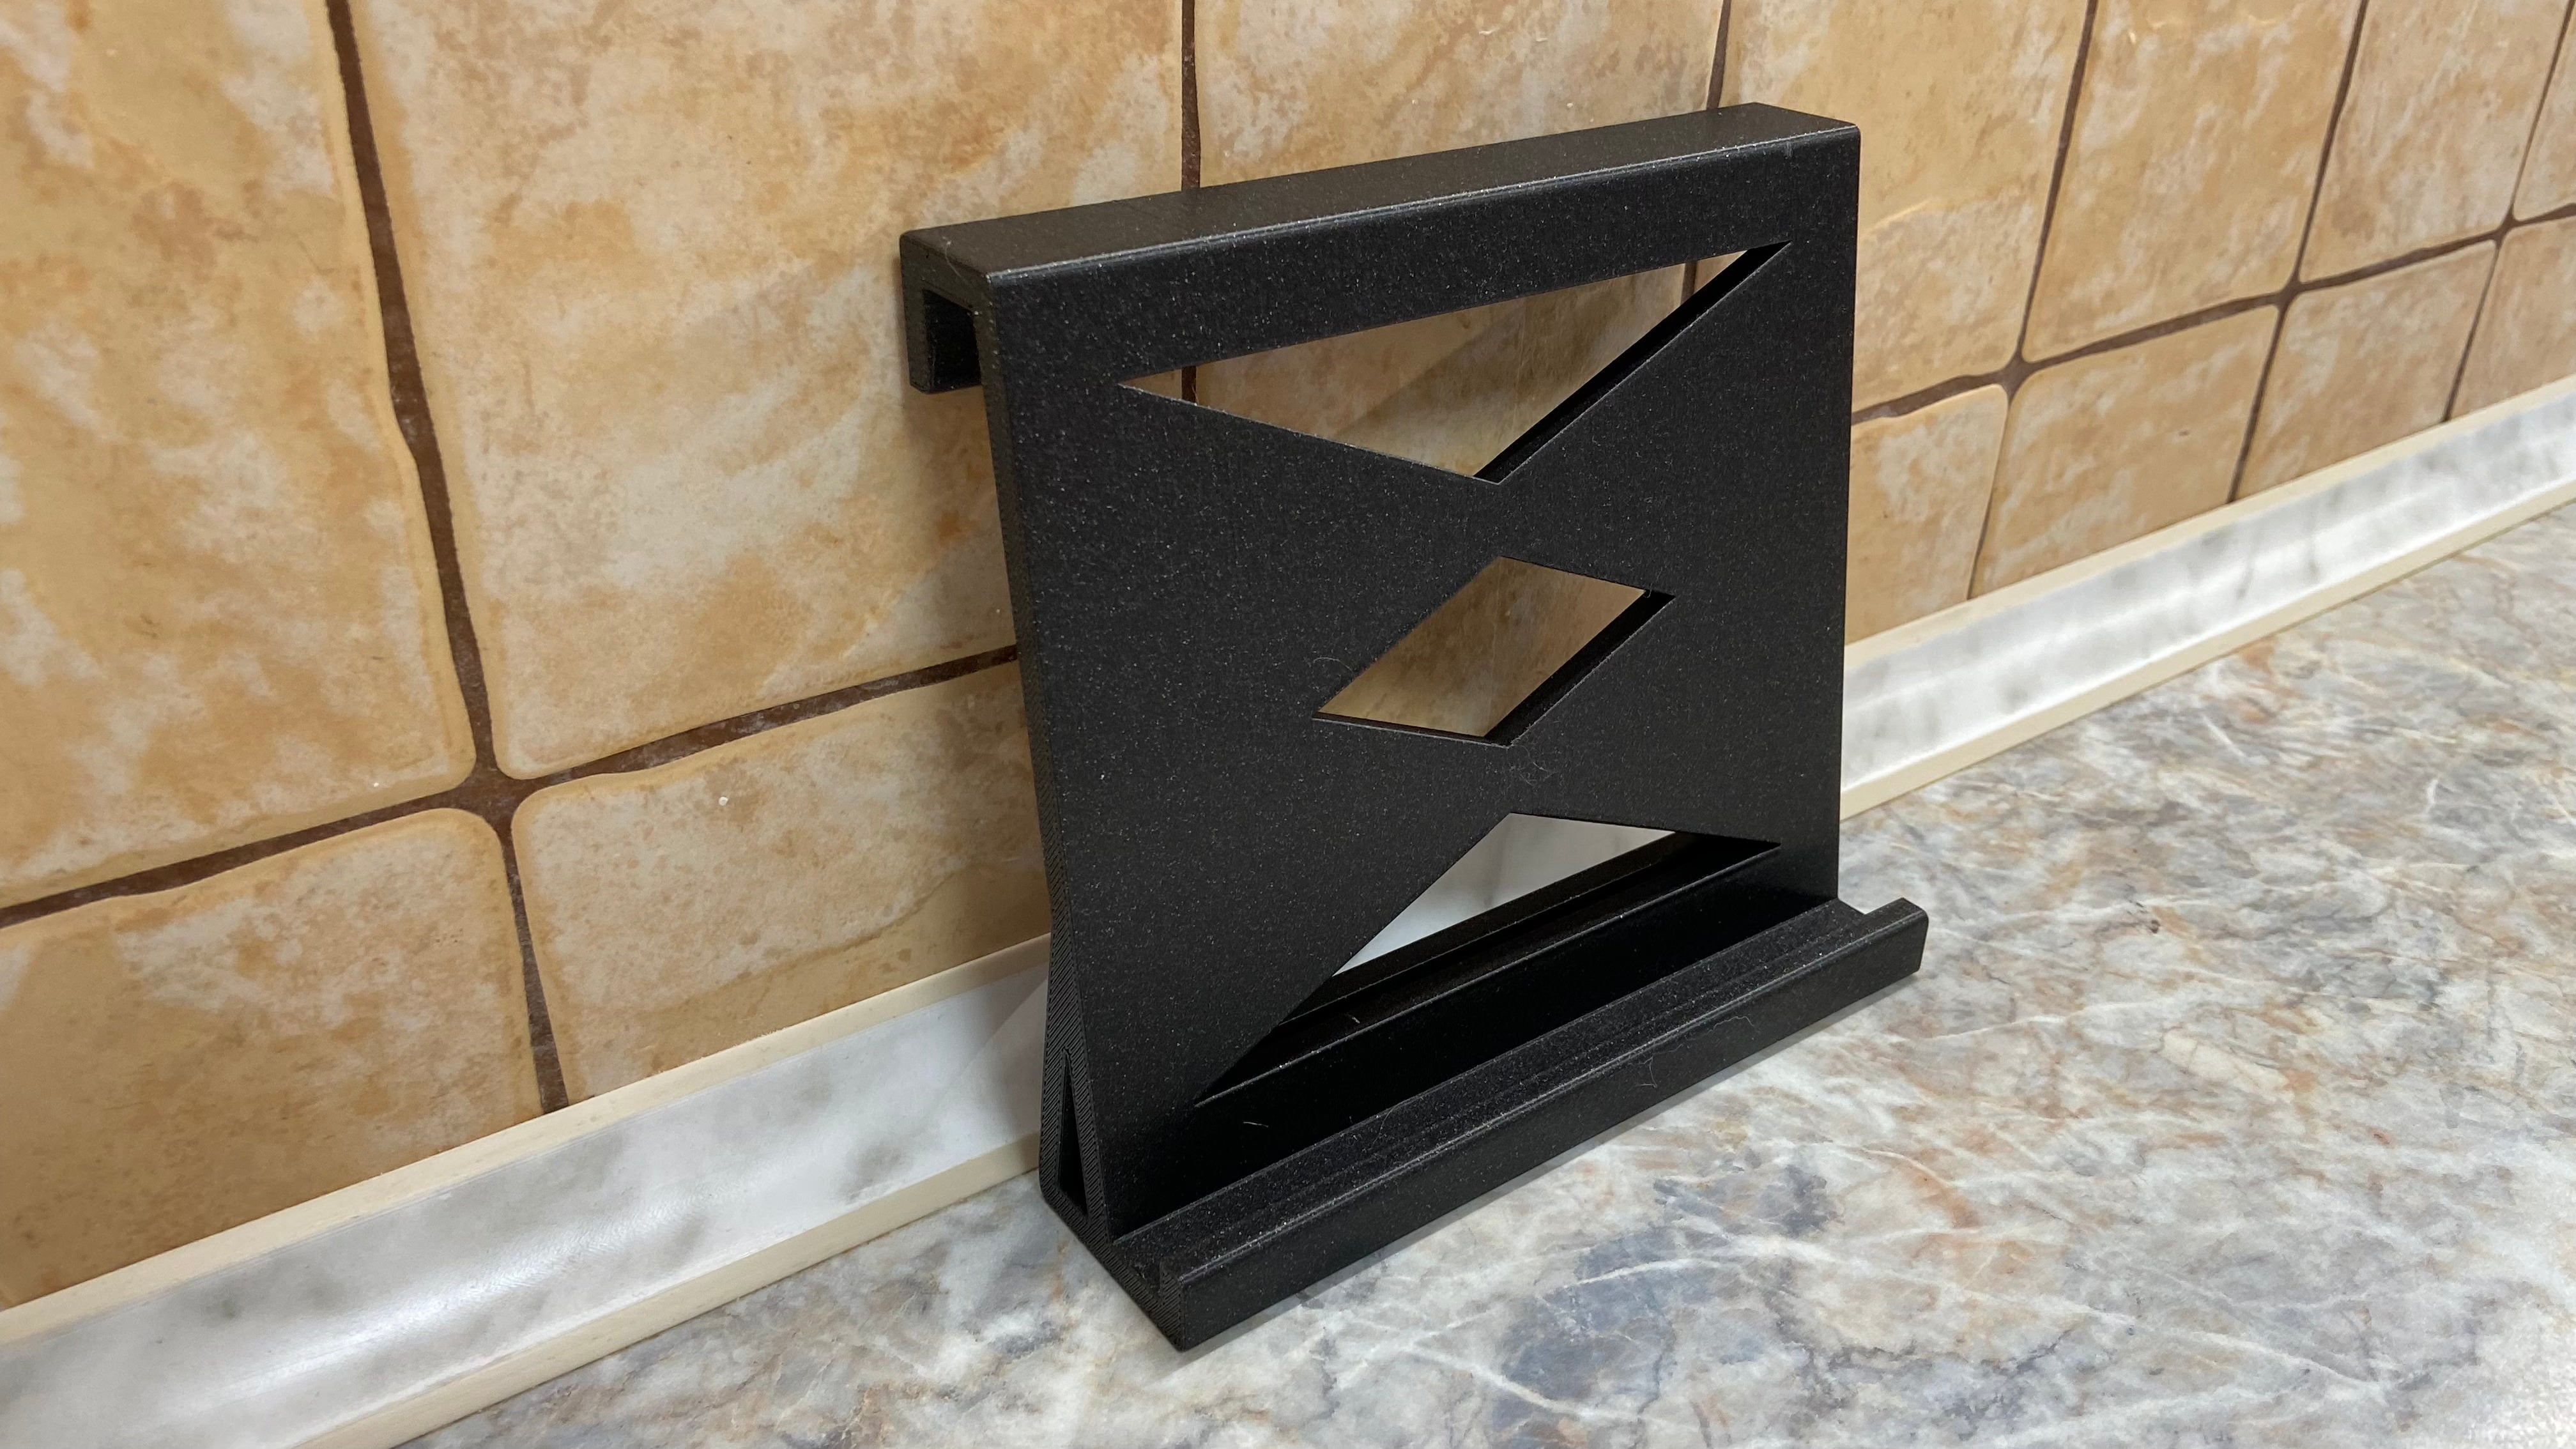 Compact iPad Holder for the Kitchen